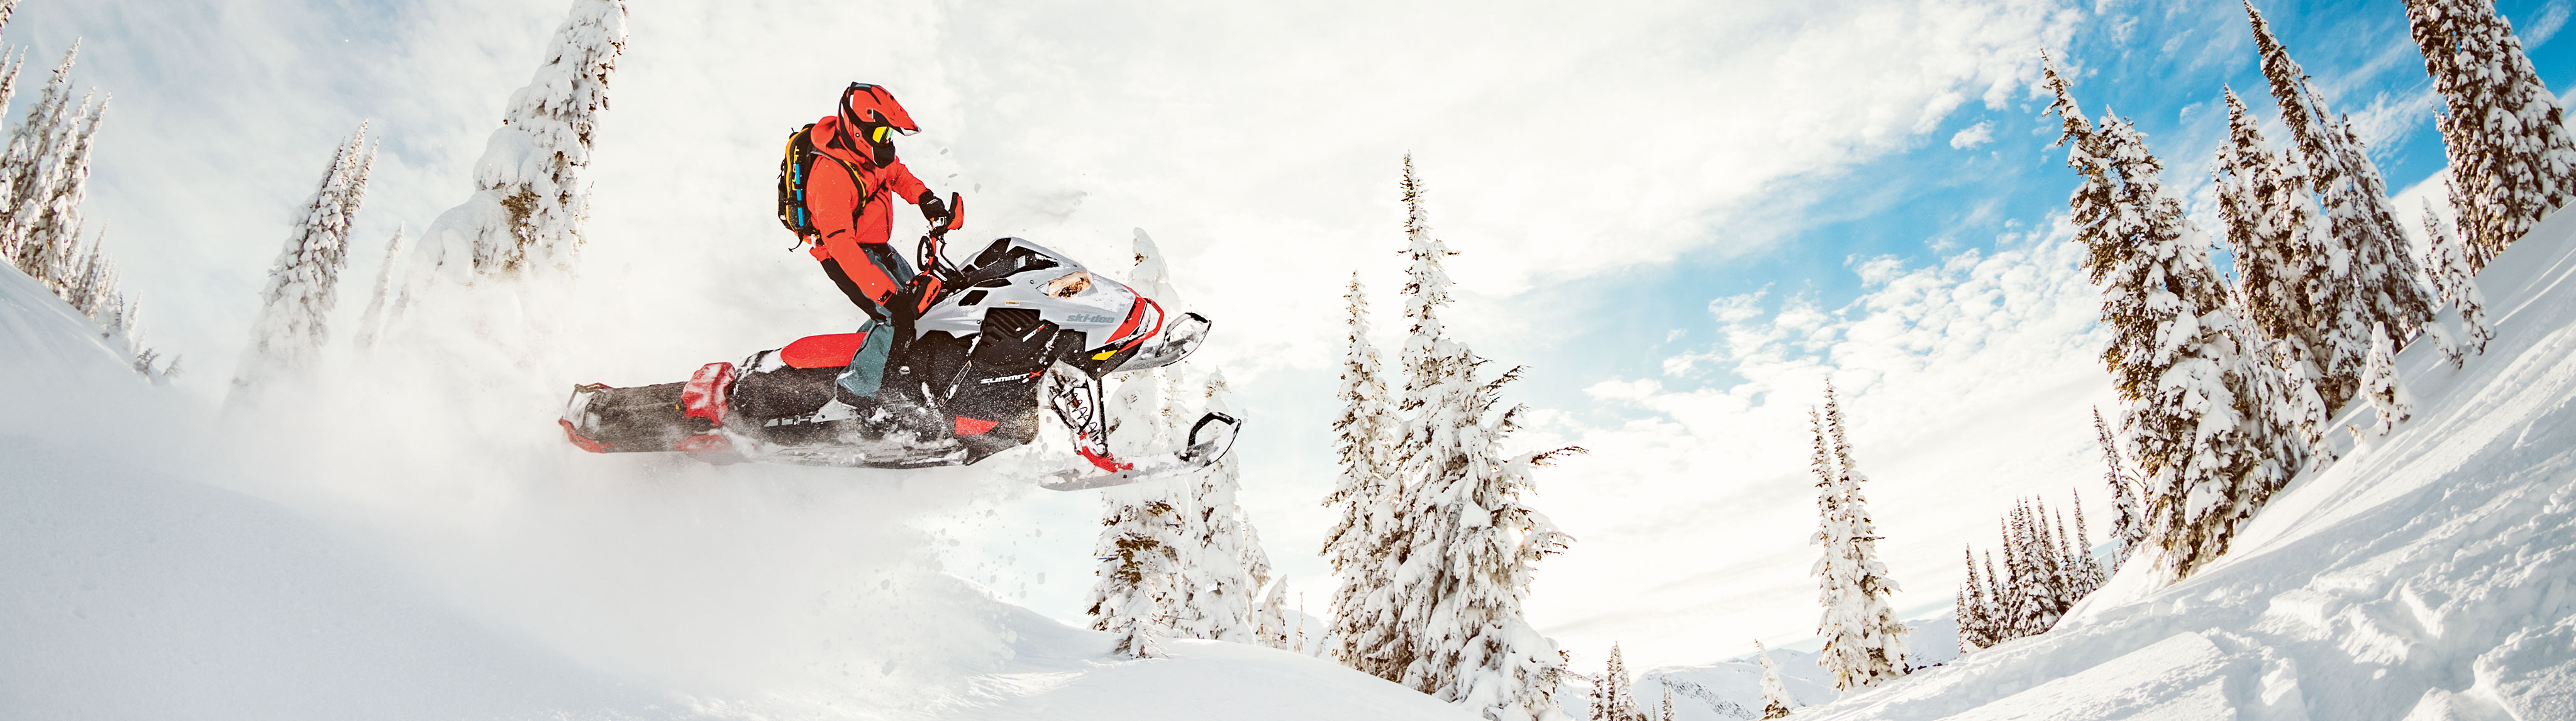 Man jumping with a Ski-Doo snowmobile in Deep-Snow